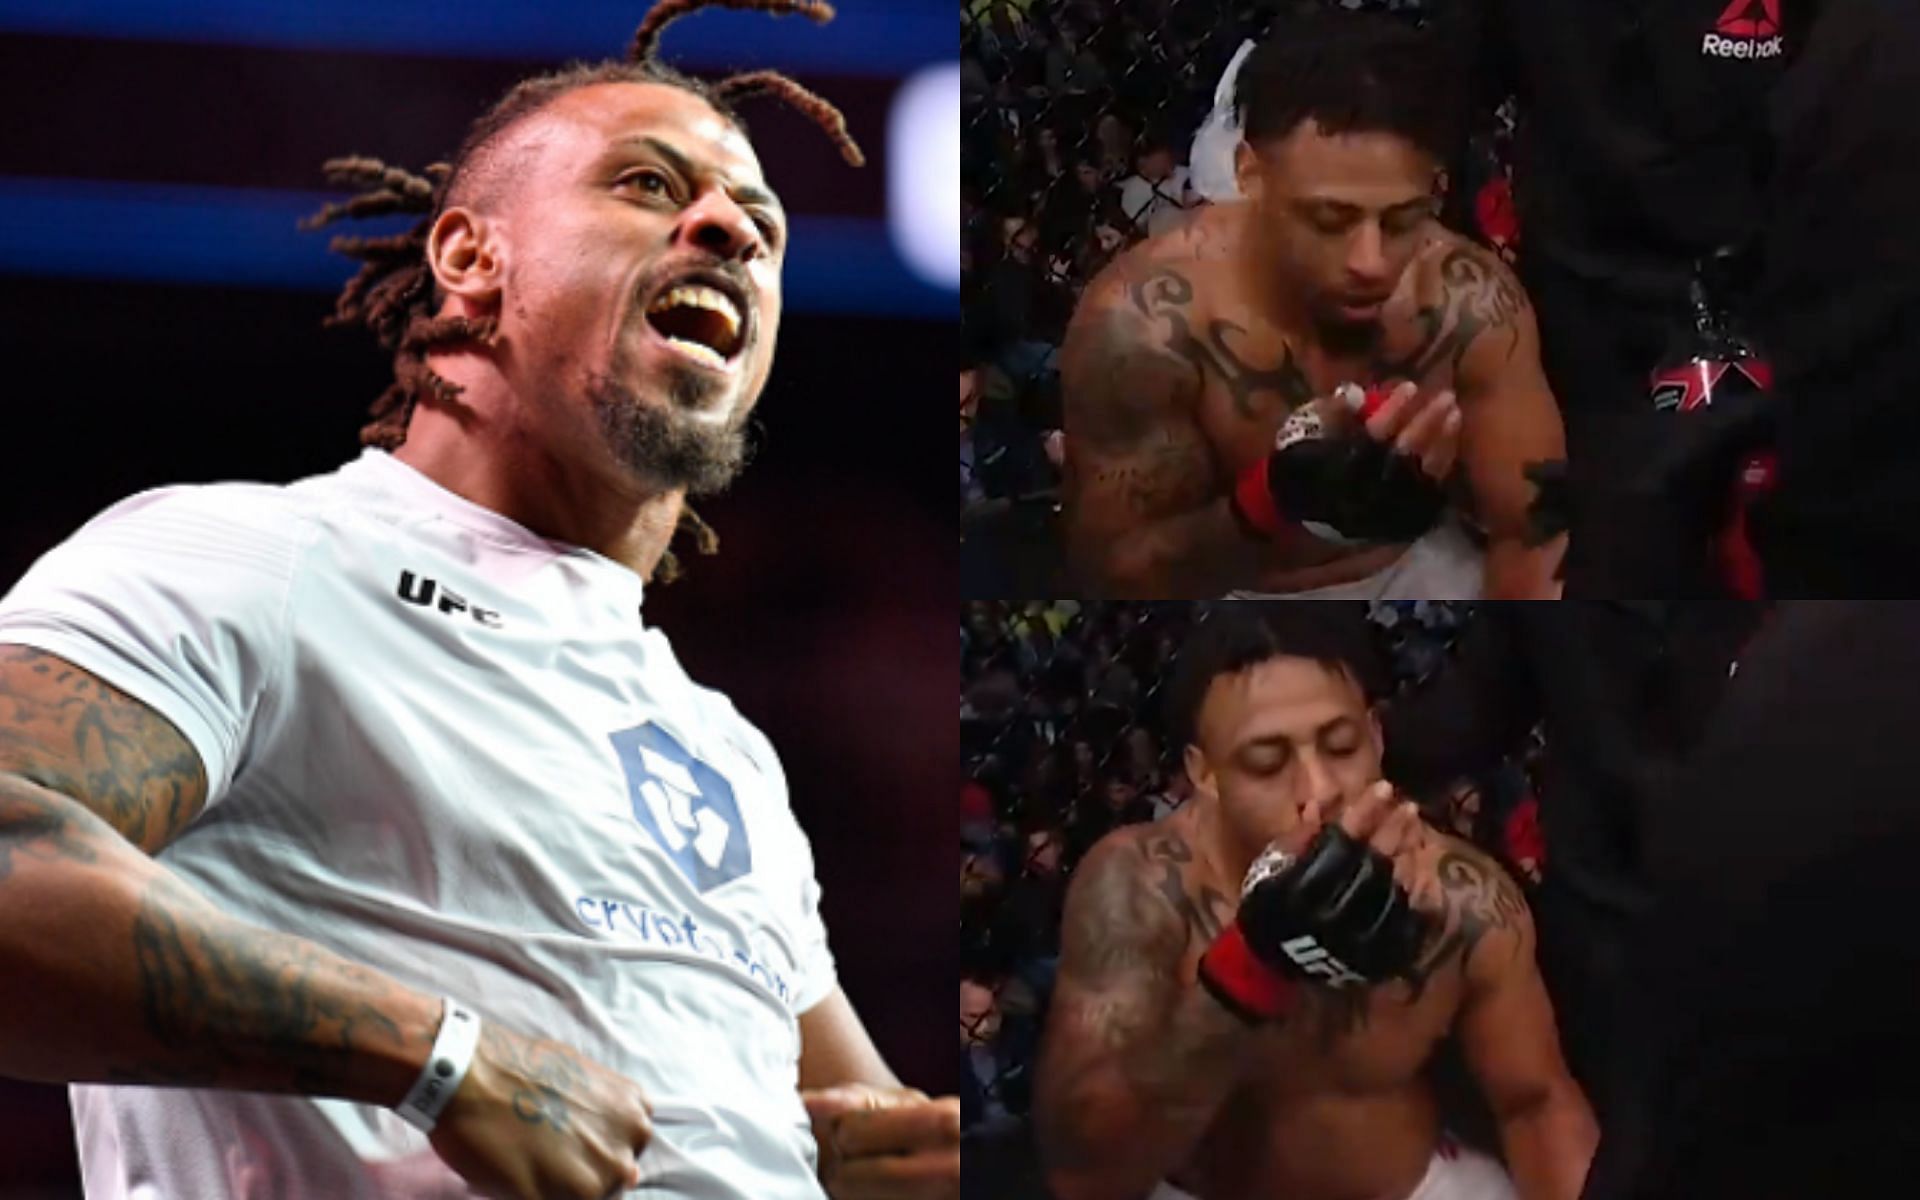 Greg Hardy (left, image courtesy of Getty); Hardy using the inhaler (top and bottom right, images courtesy of @espnmma Twitter)